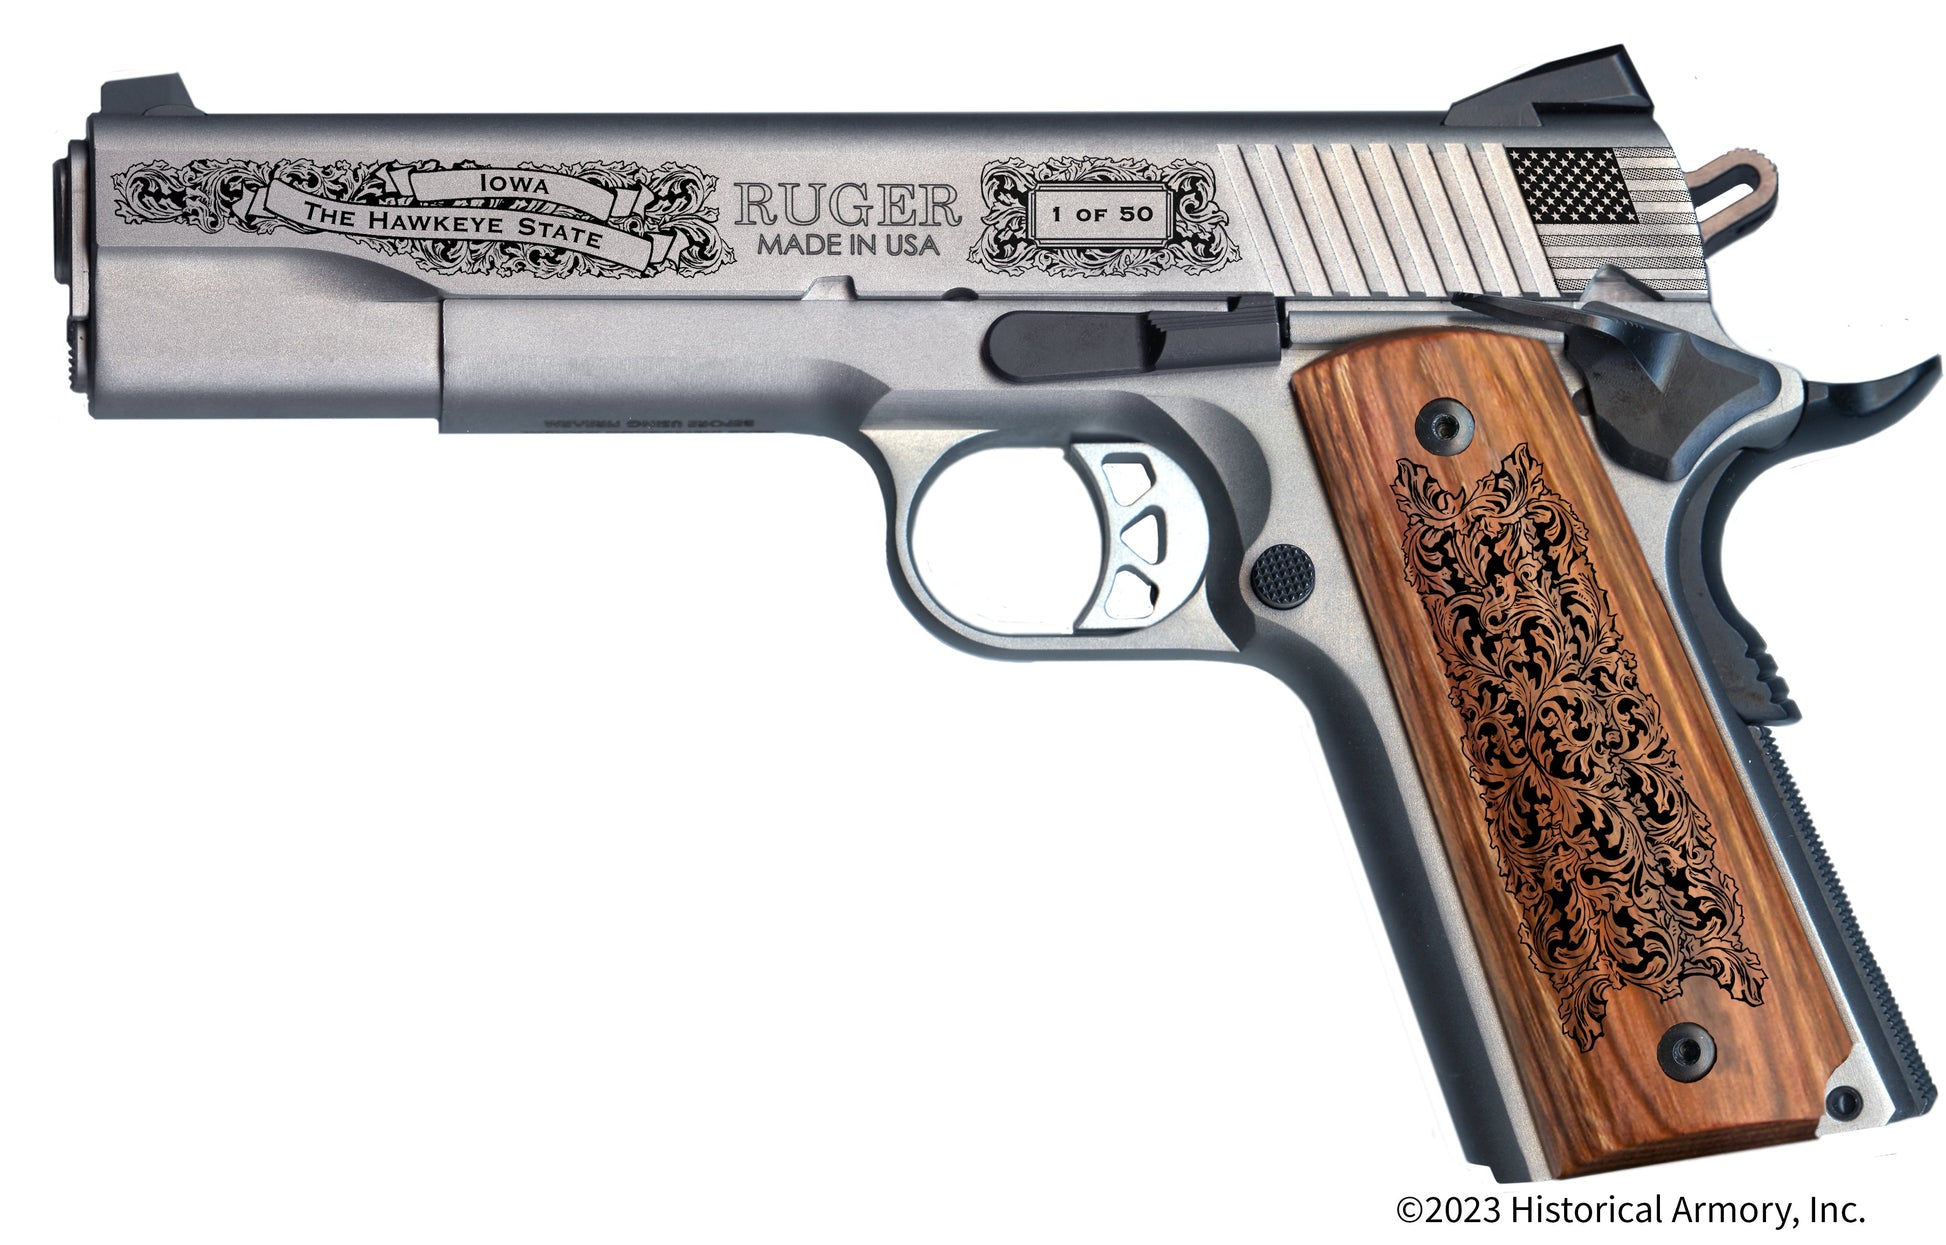 Marion County Iowa Engraved .45 Auto Ruger 1911